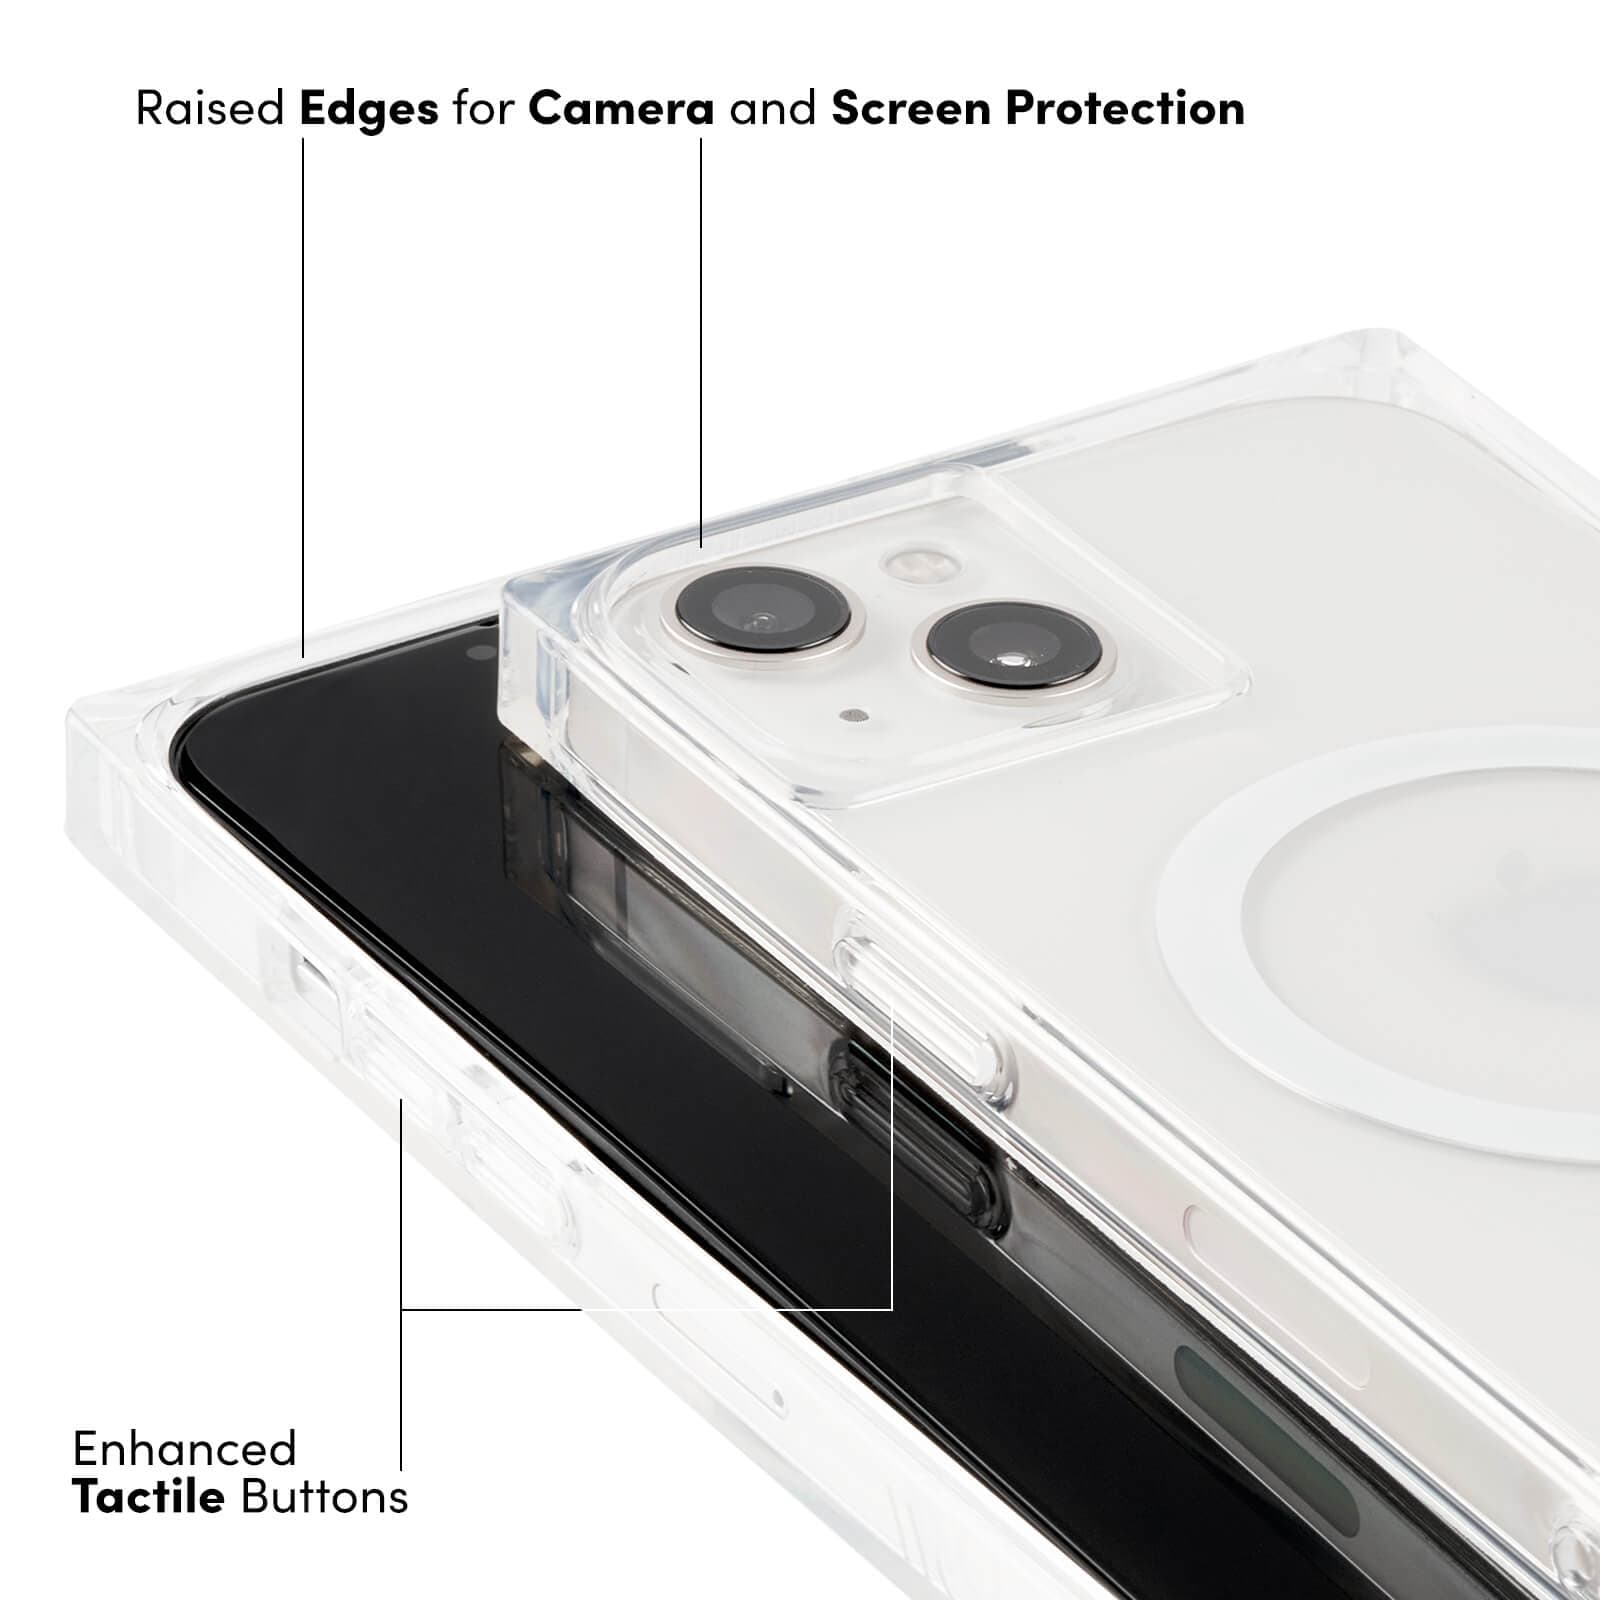 RAISED EDGED FOR CAMERA AND SCREEN PROTECTION, ENHANCES TACTILE BUTTONS. COLOR::CLEAR